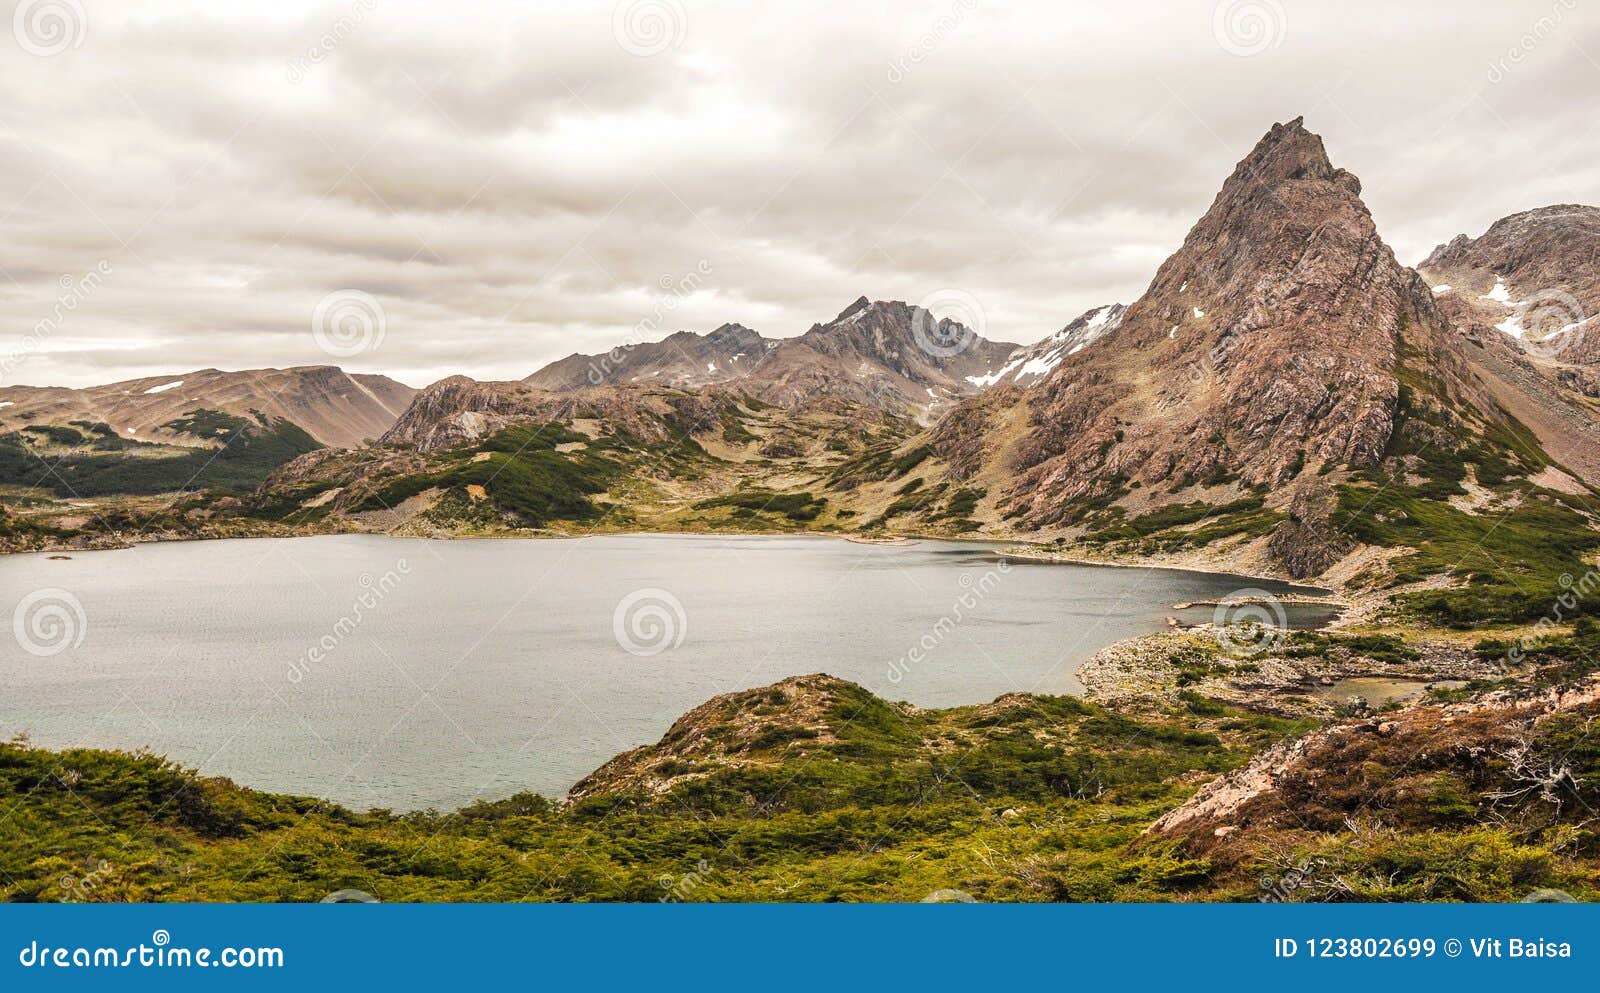 view on the lake and mountains around on the southernmost trek in the world in dientes de navarino in isla navarino, patagonia, ch